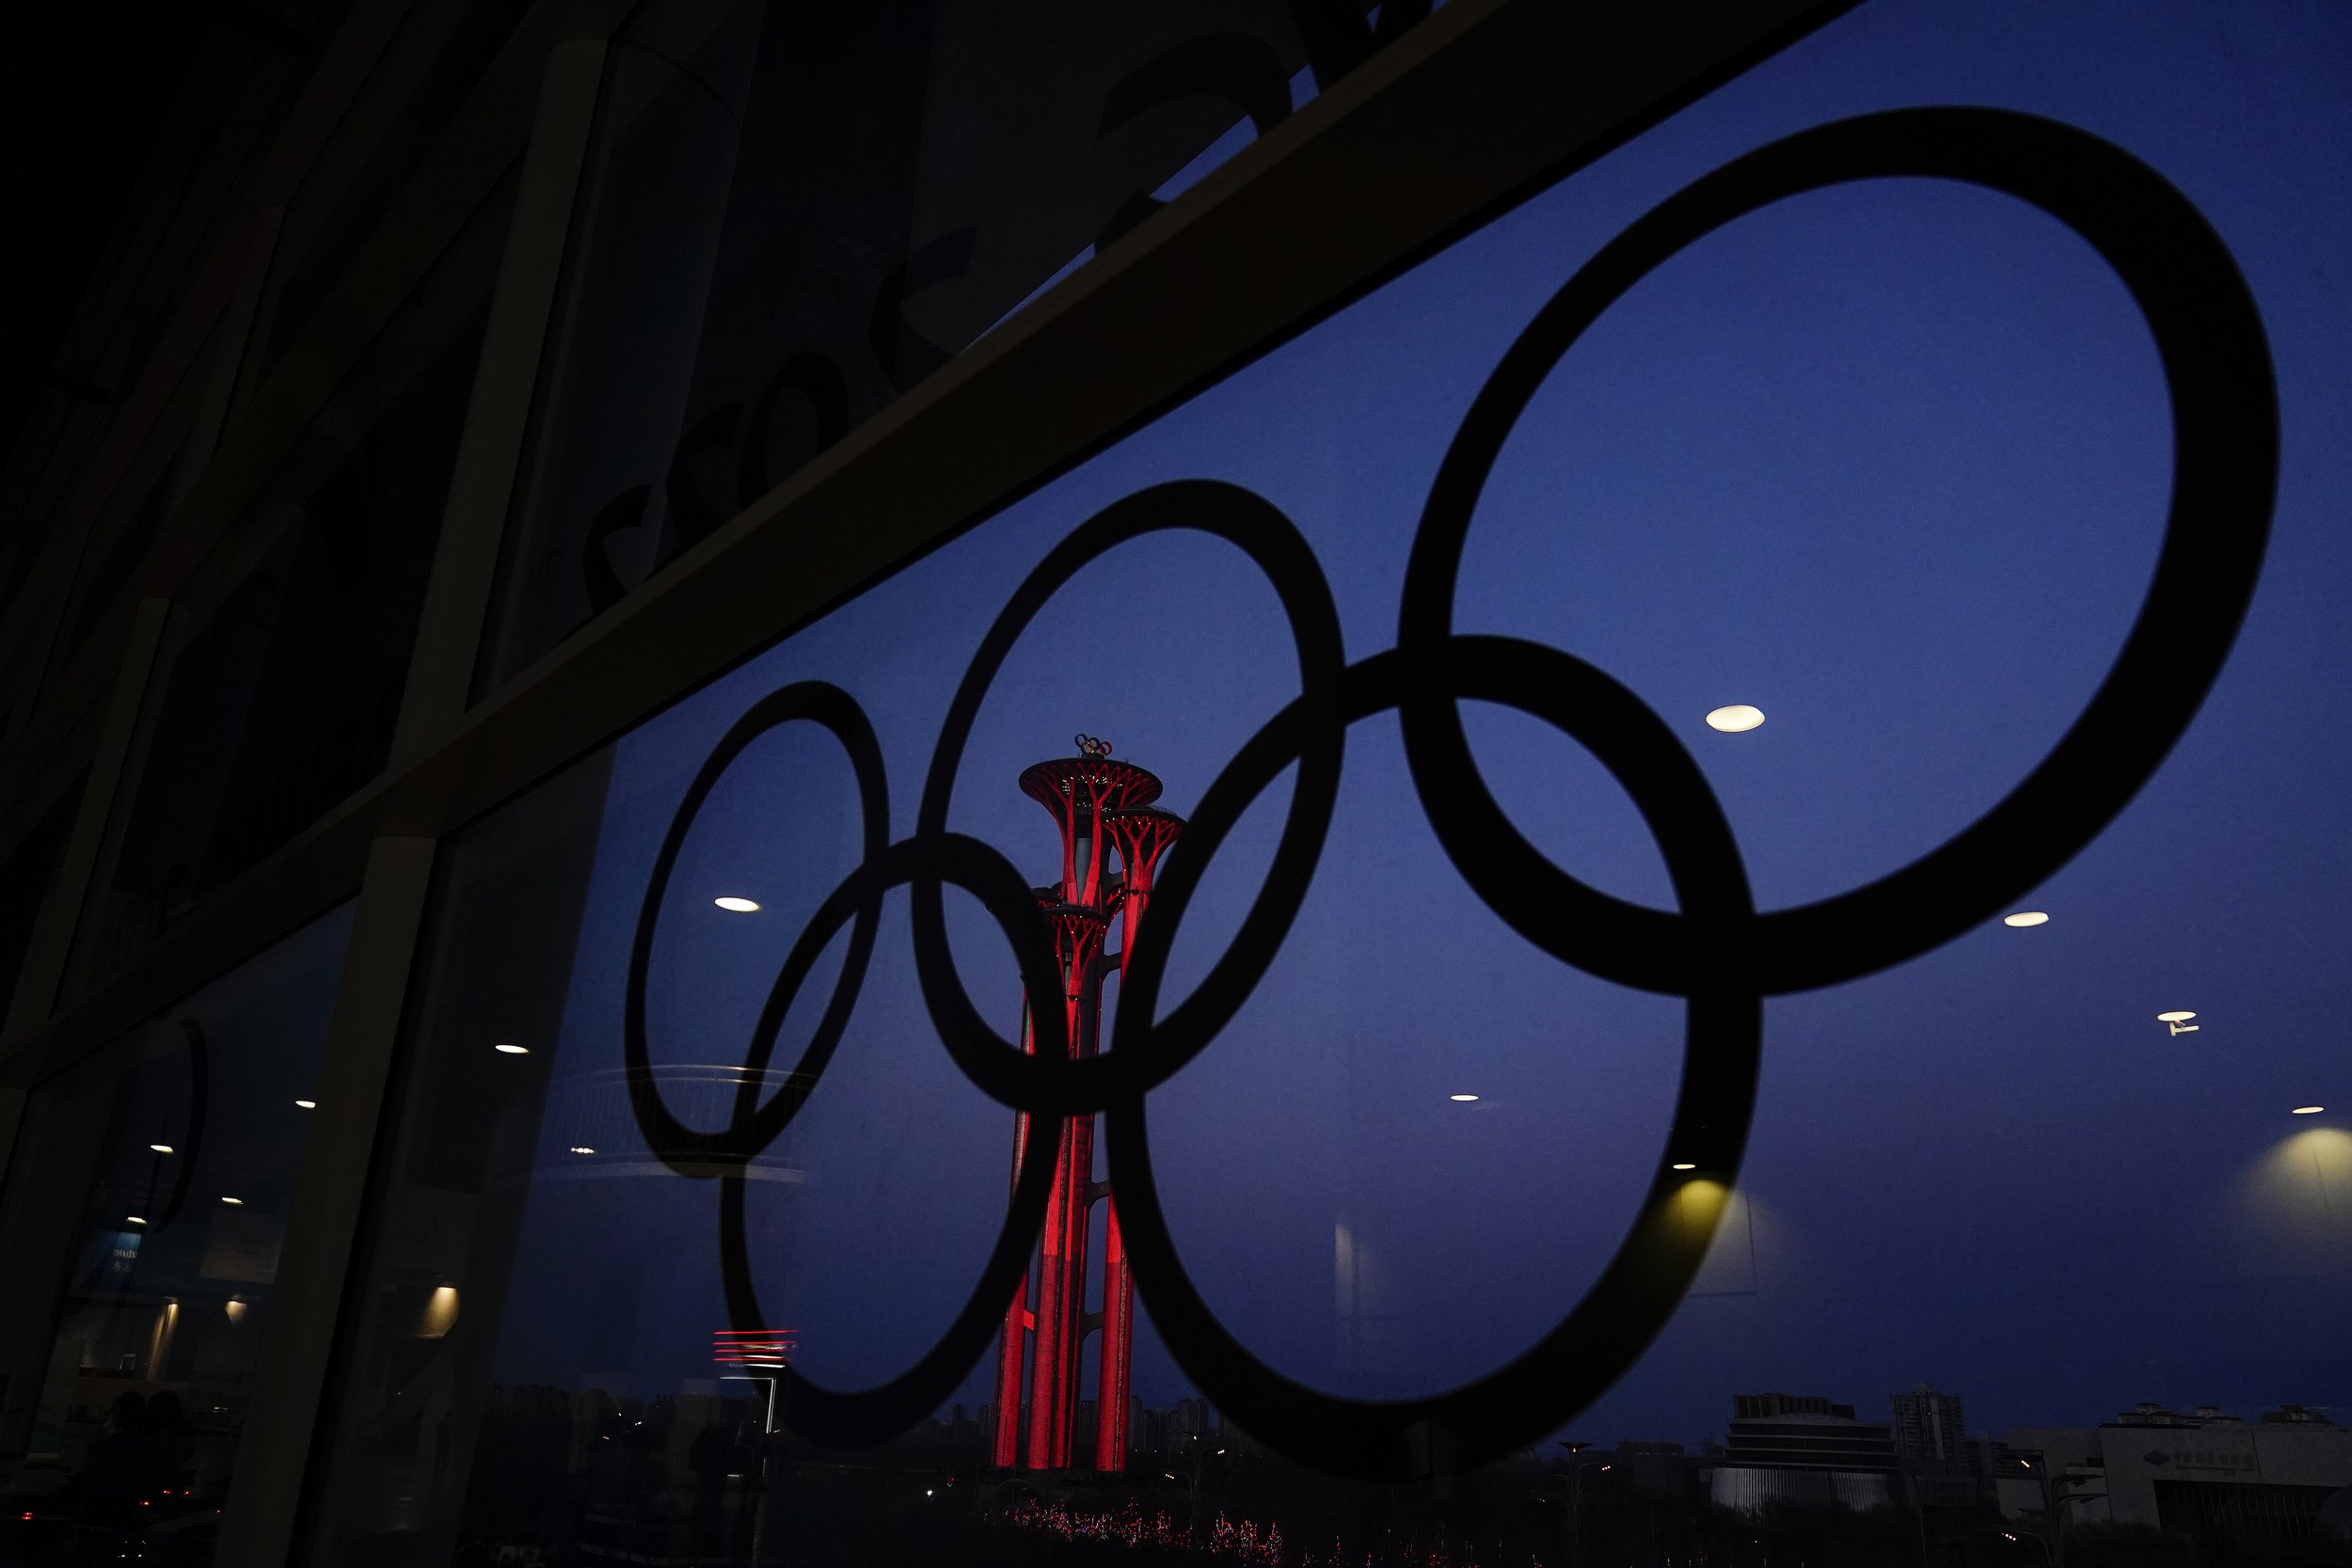  The Beijing Olympic Tower is displayed inside the Olympic rings at the main media center ahead of the Beijing Winter Olympics Monday, Jan. 31, 2022, in Beijing. (AP Photo/Brynn Anderson) 